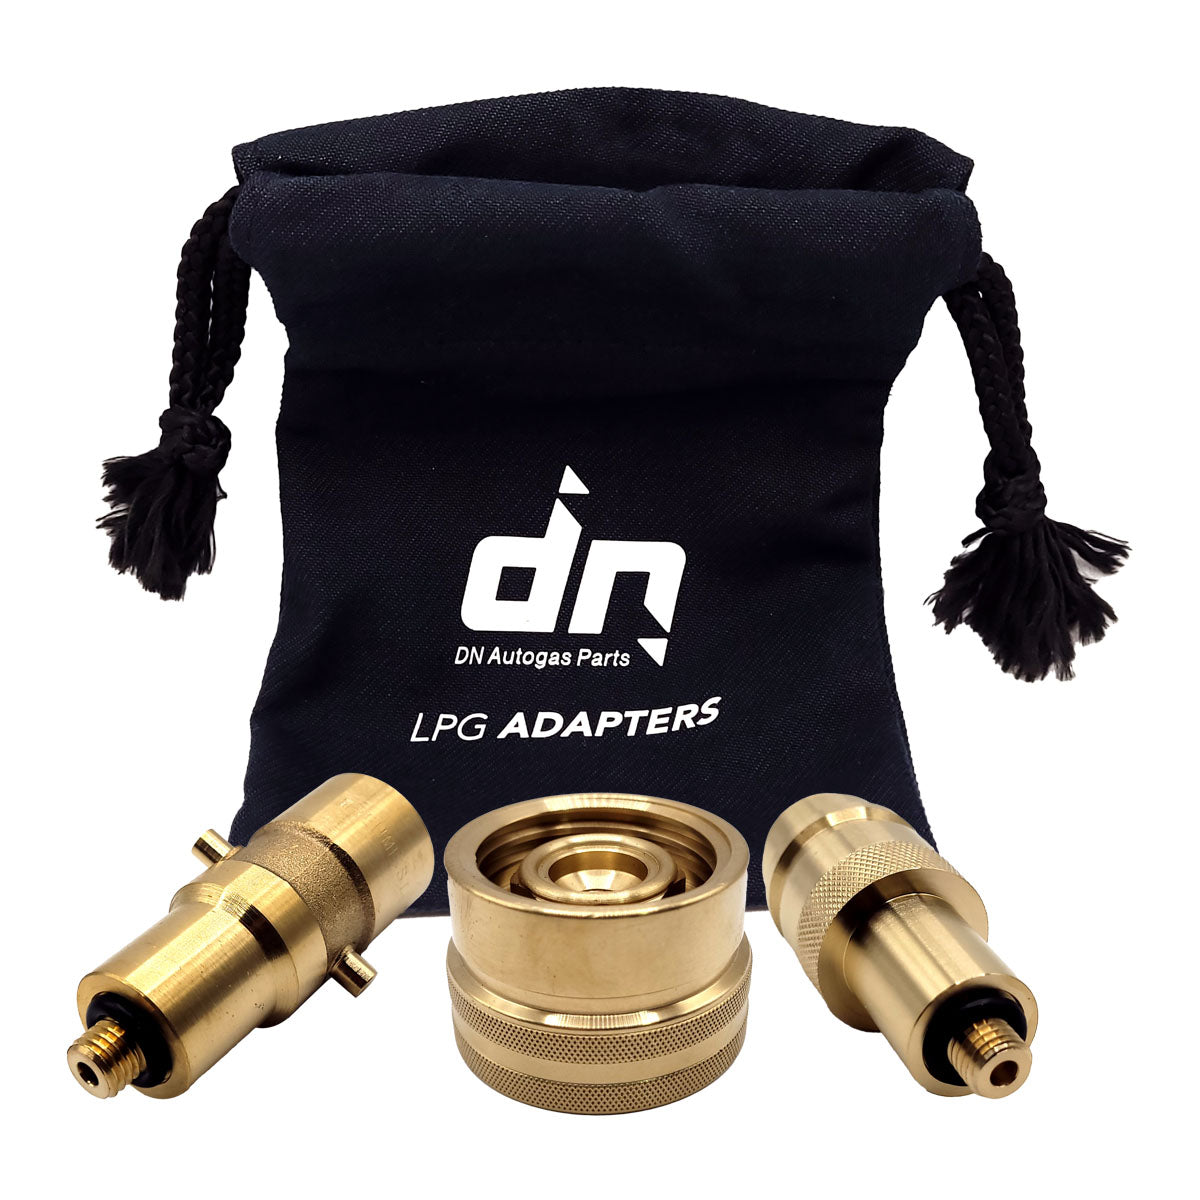 Universal Euro adapter kit for LPG cylinders